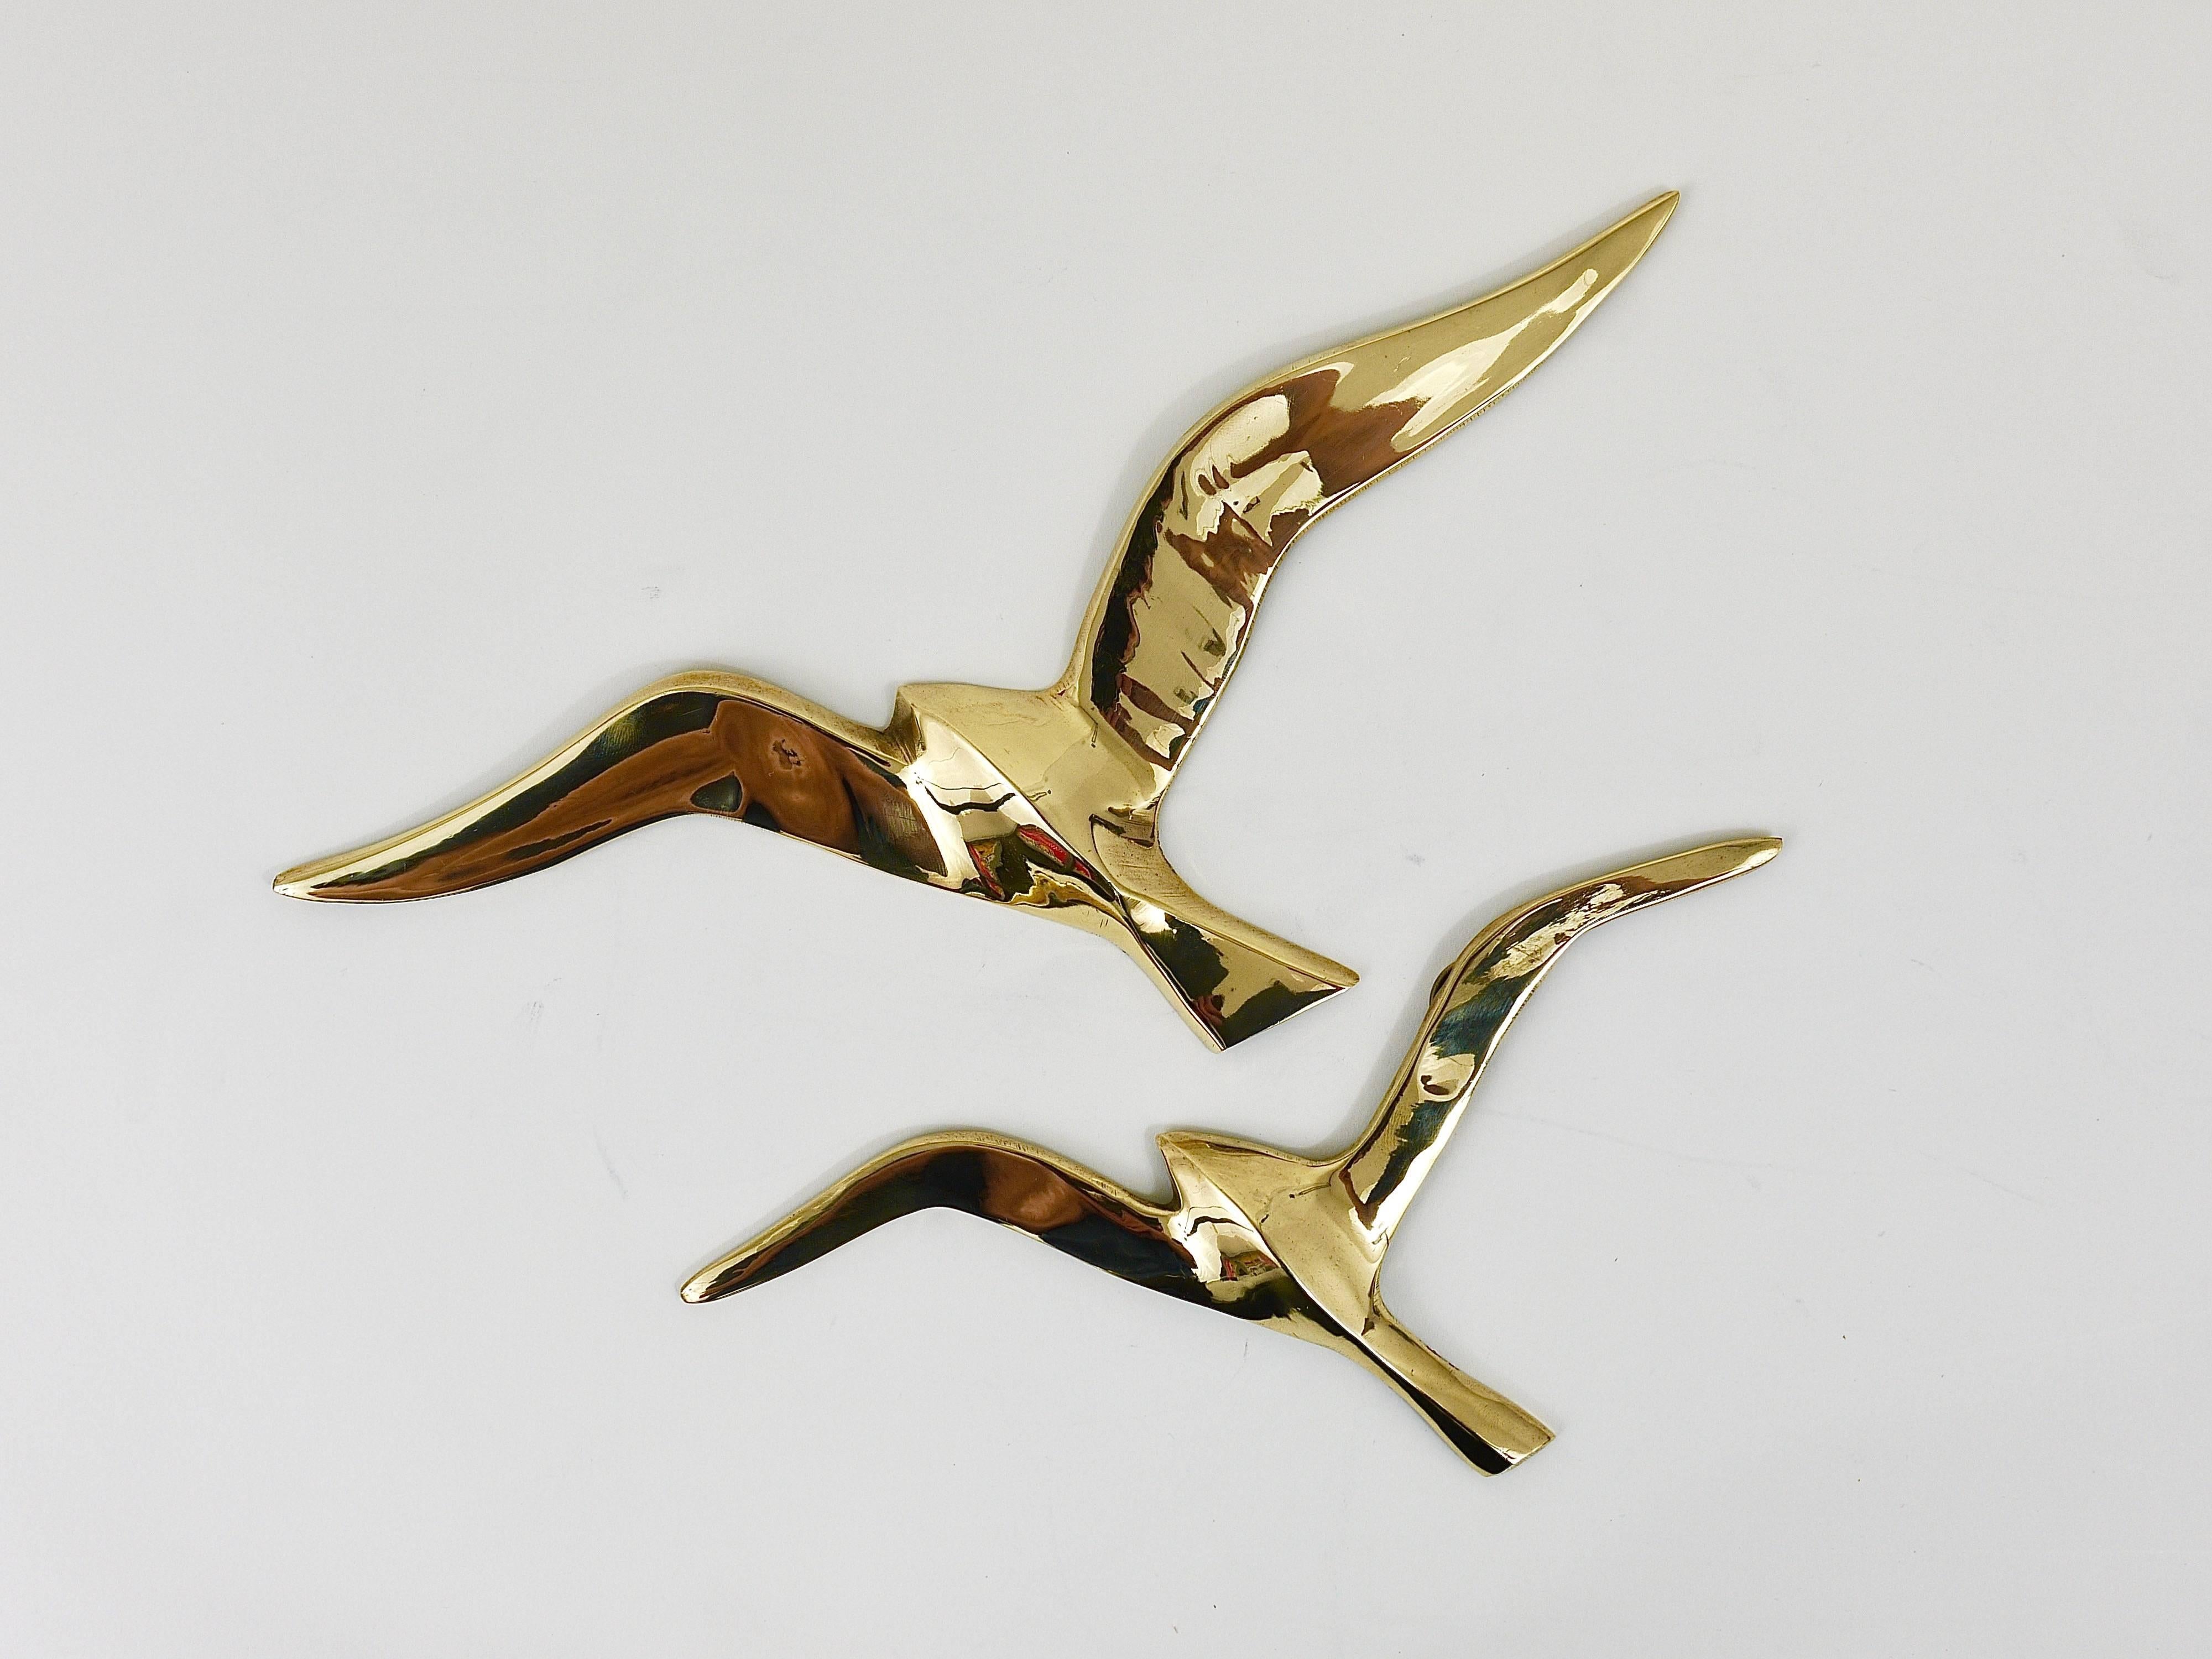 A set of six lovely wall-mounted modernist birds / gulls. Handmade of brass in the 1950s in Austria. Gently polished, in excellent condition. Width of the birds: 12 to 8.5 in.